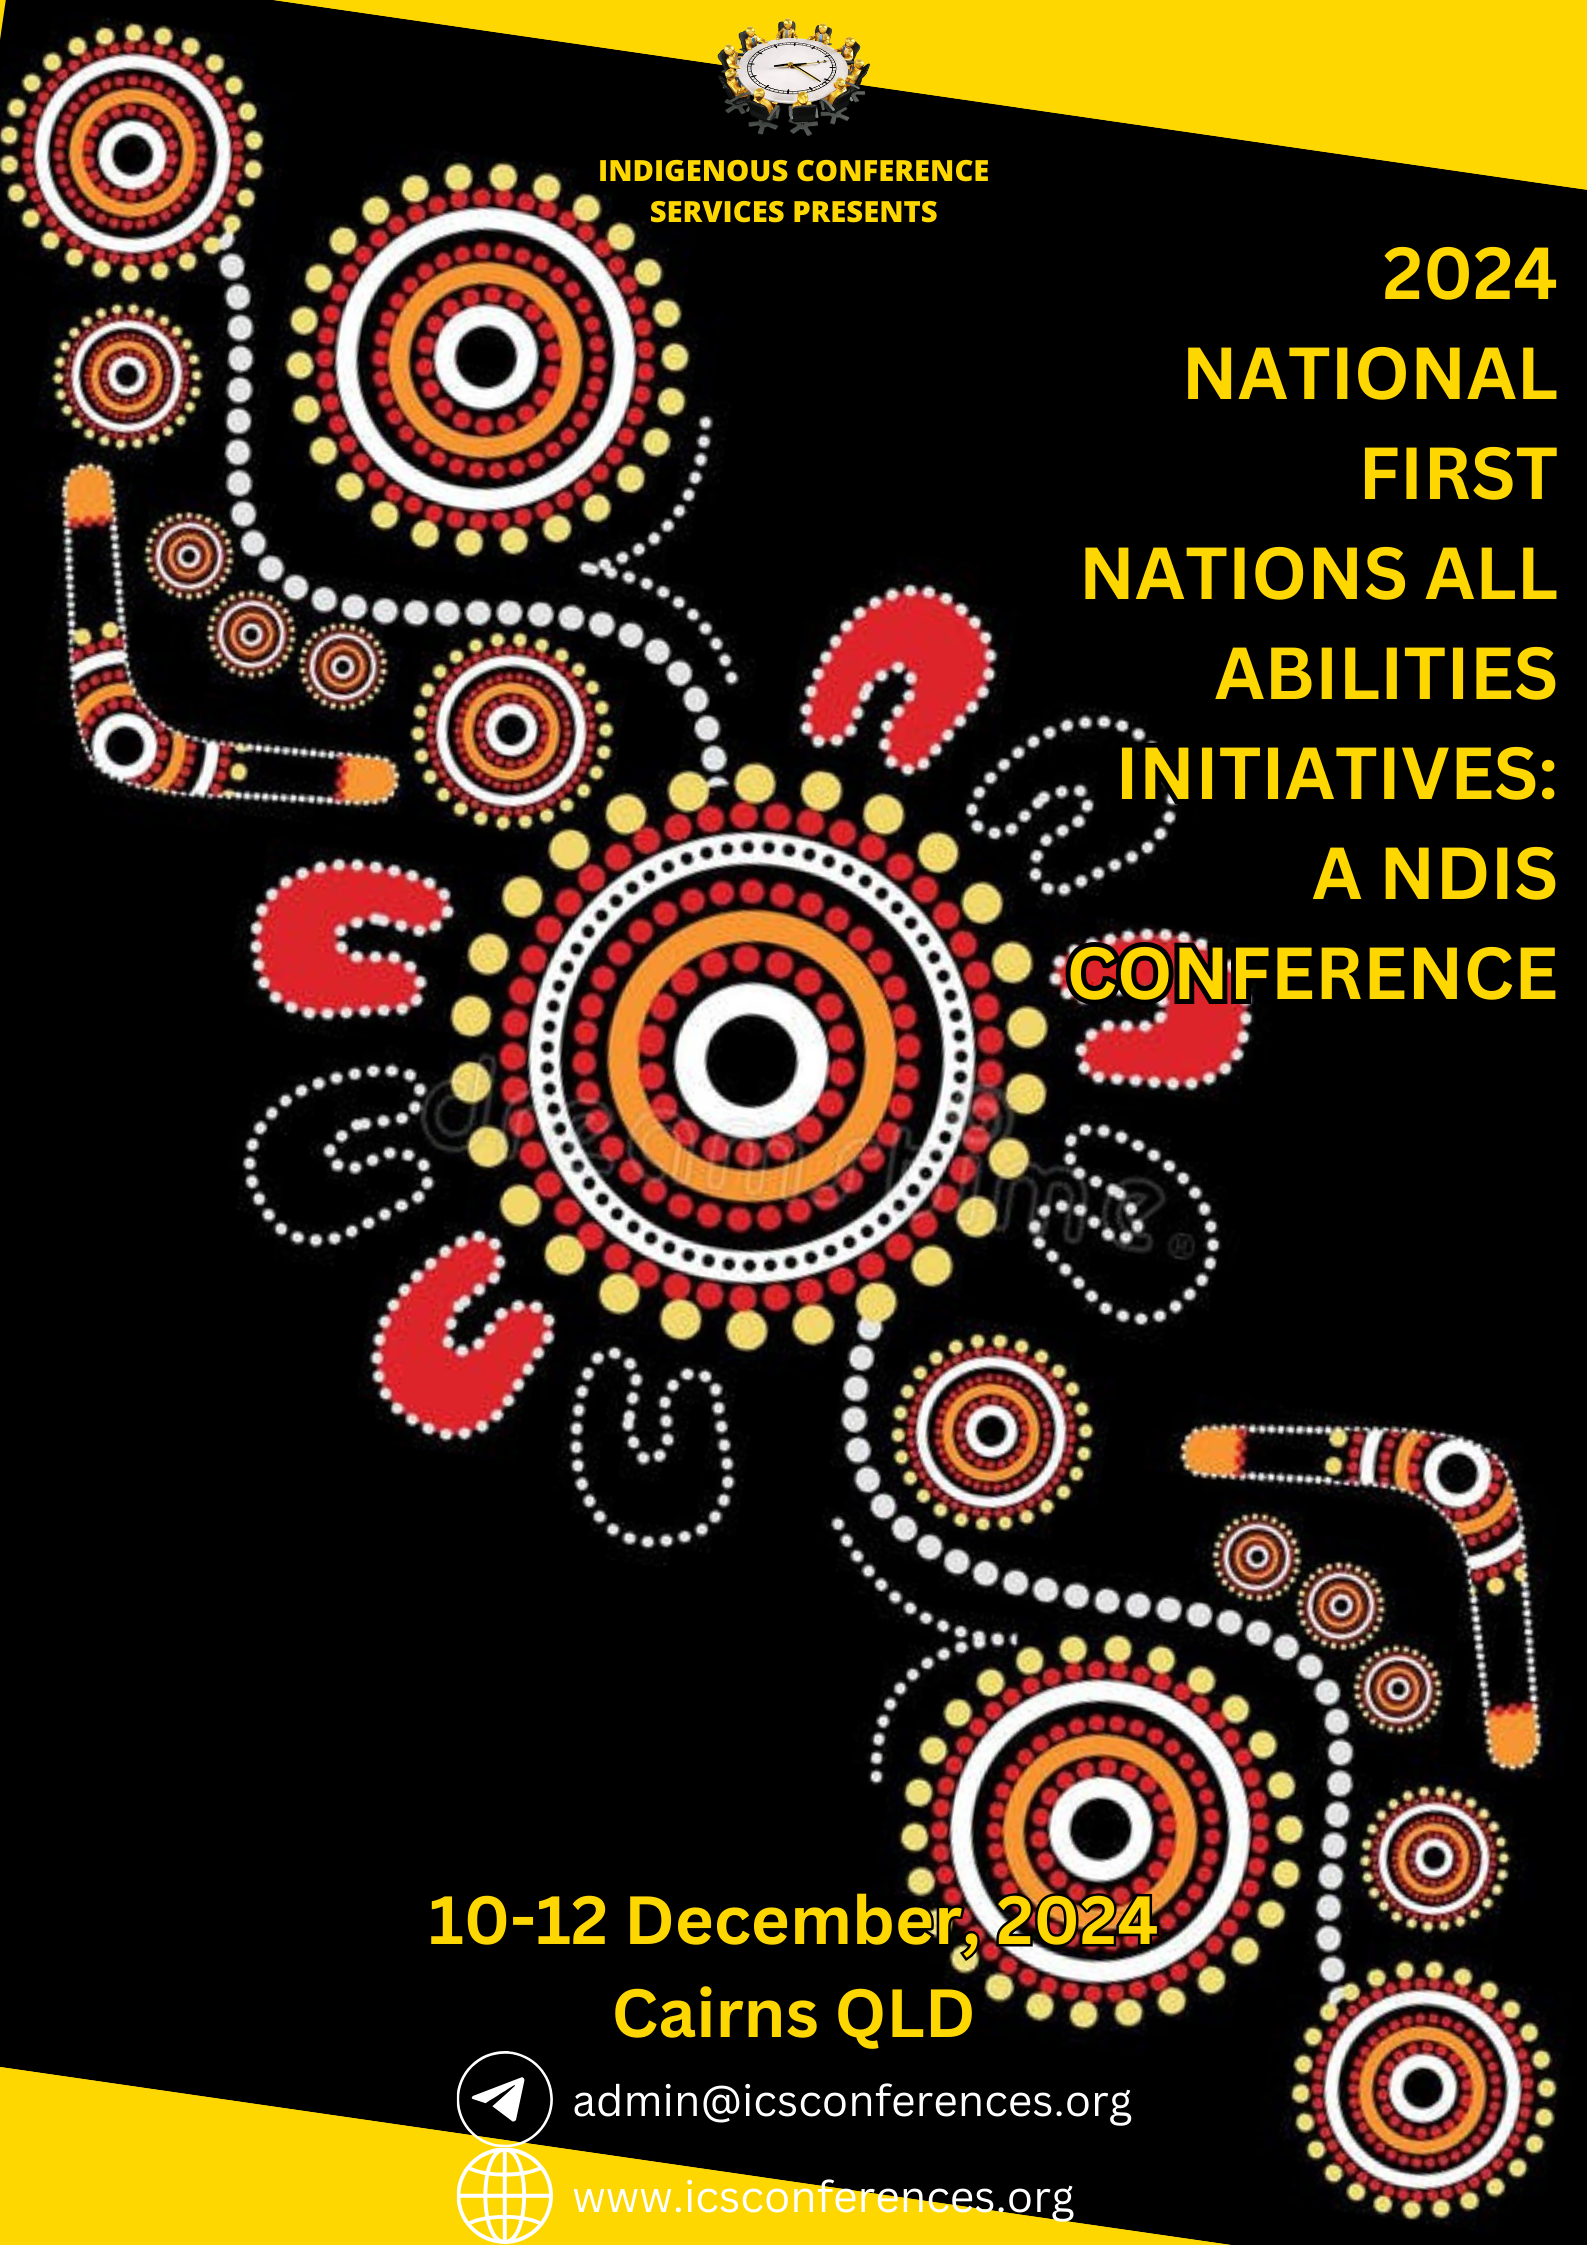 First Nations National All Abilities Initiatives: A NDIS Conference